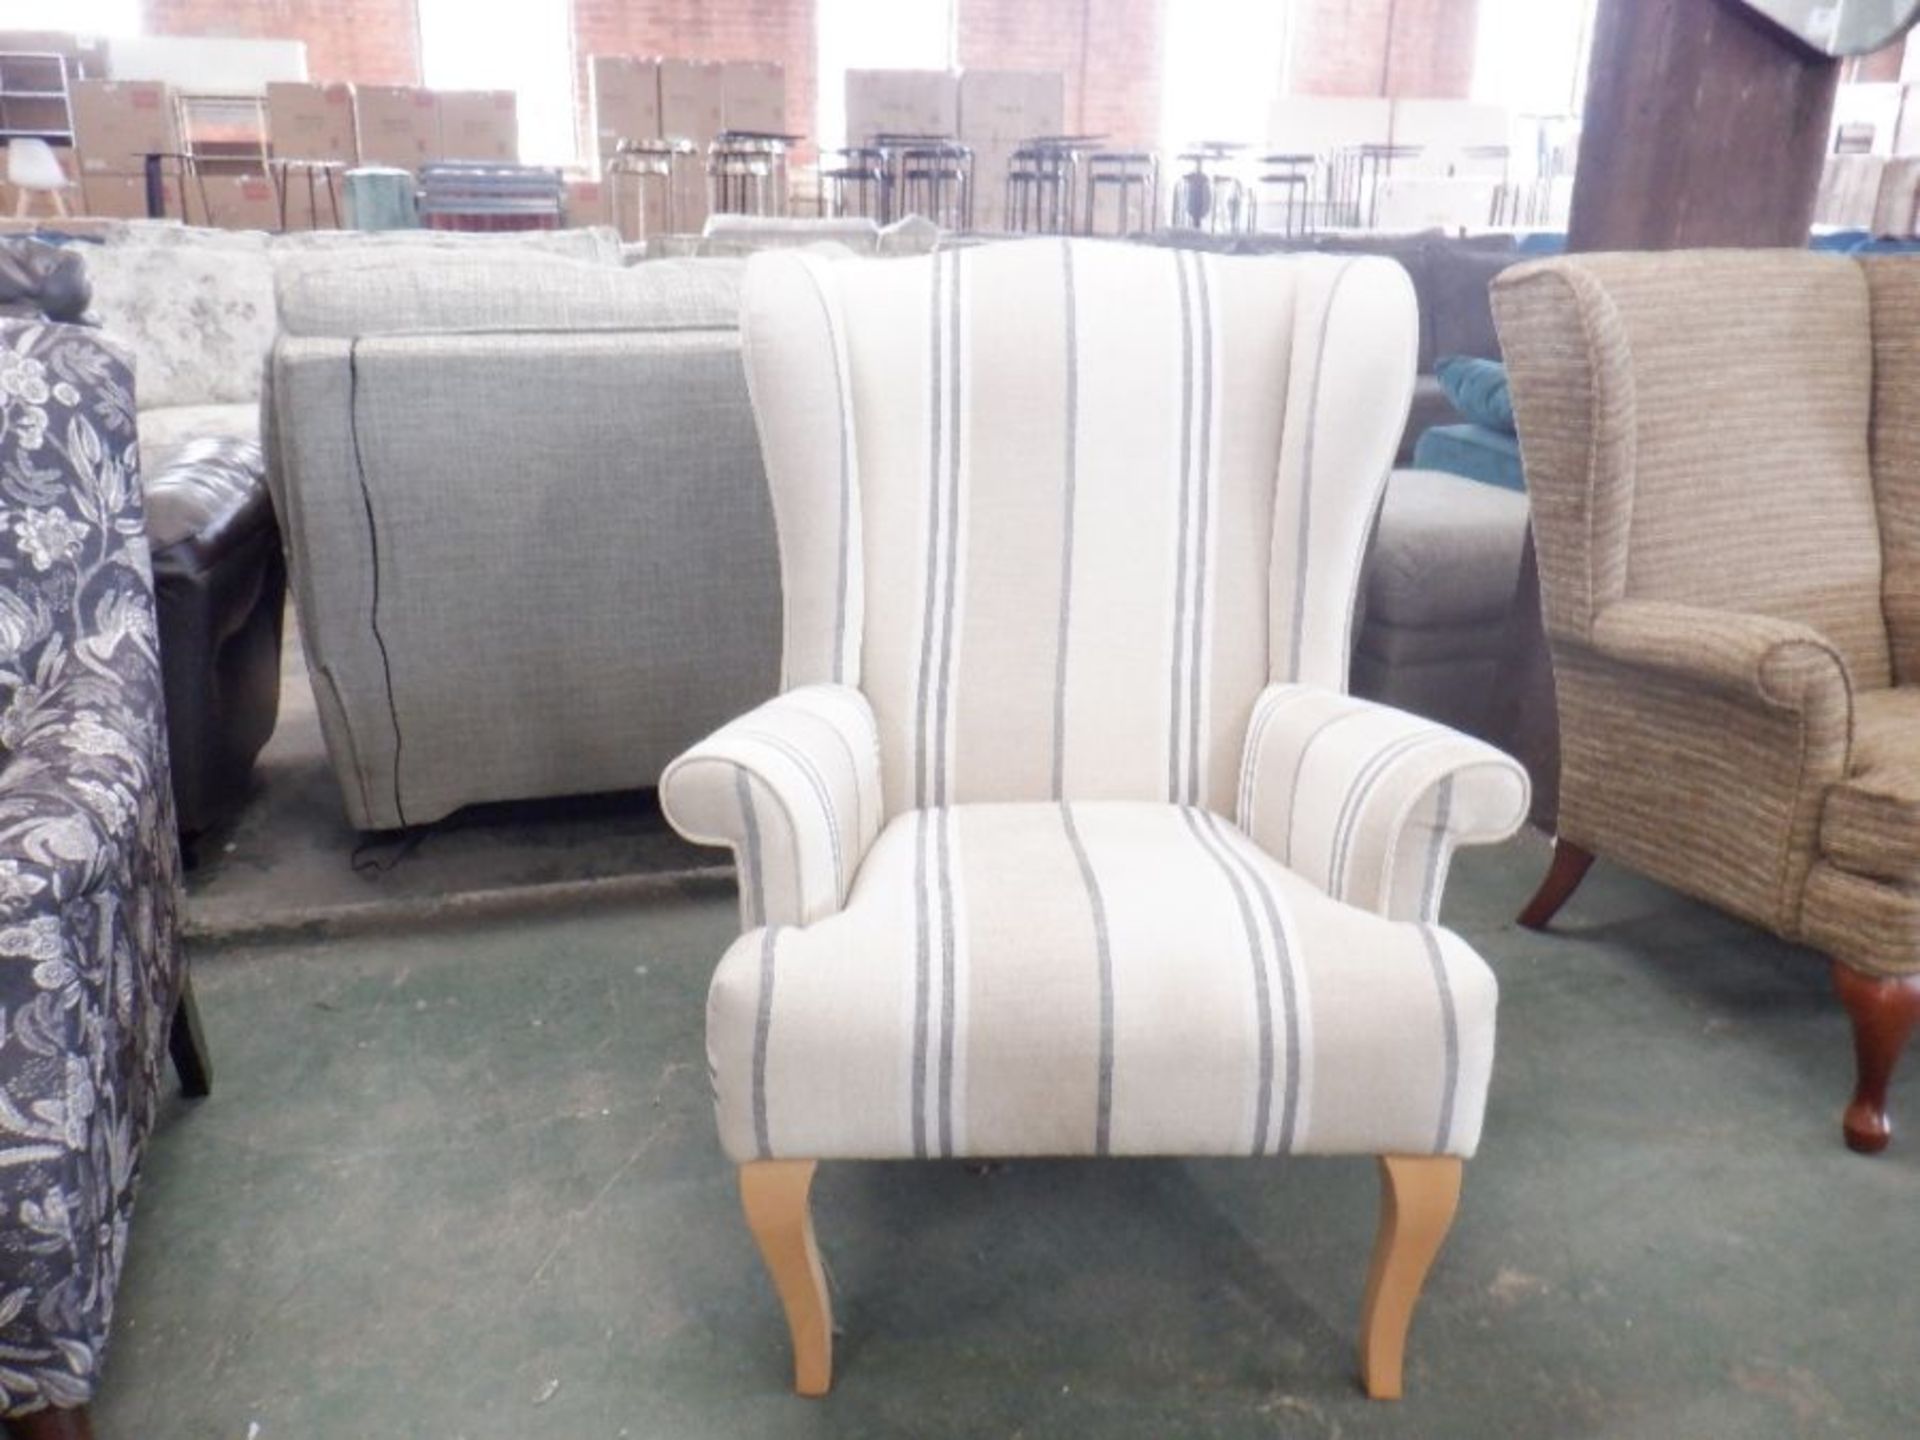 BEIGE AND CREAM STRIPED WING CHAIR (P21- W01237133